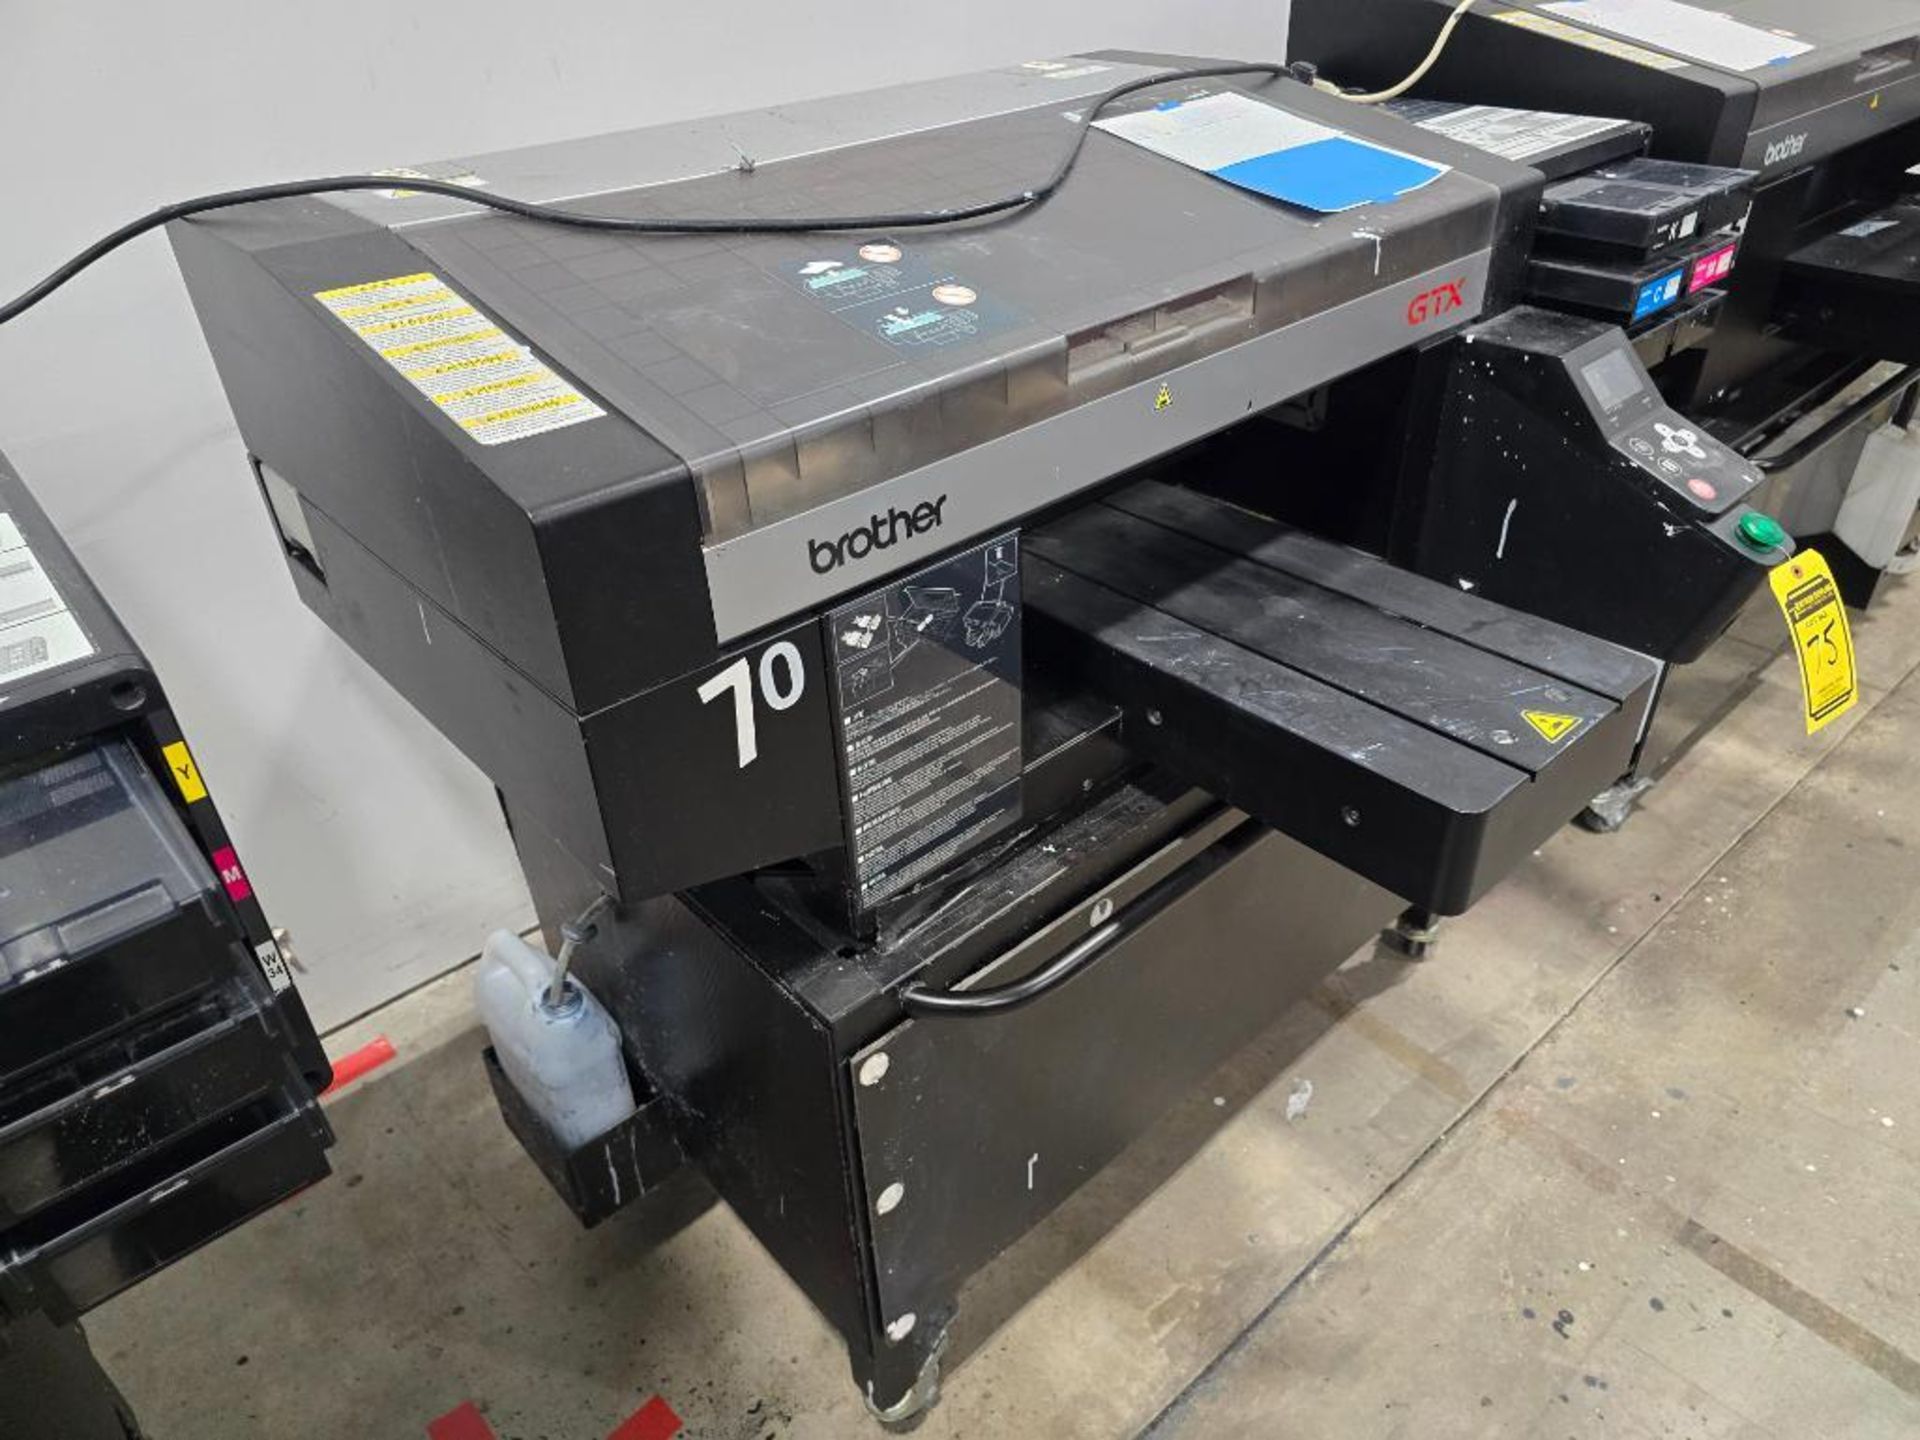 2018 Brother GTX-422 DTG (Direct to Garment) Printer, Twin Head, 6-Color, Water Based Pigmented Ink, - Image 3 of 8